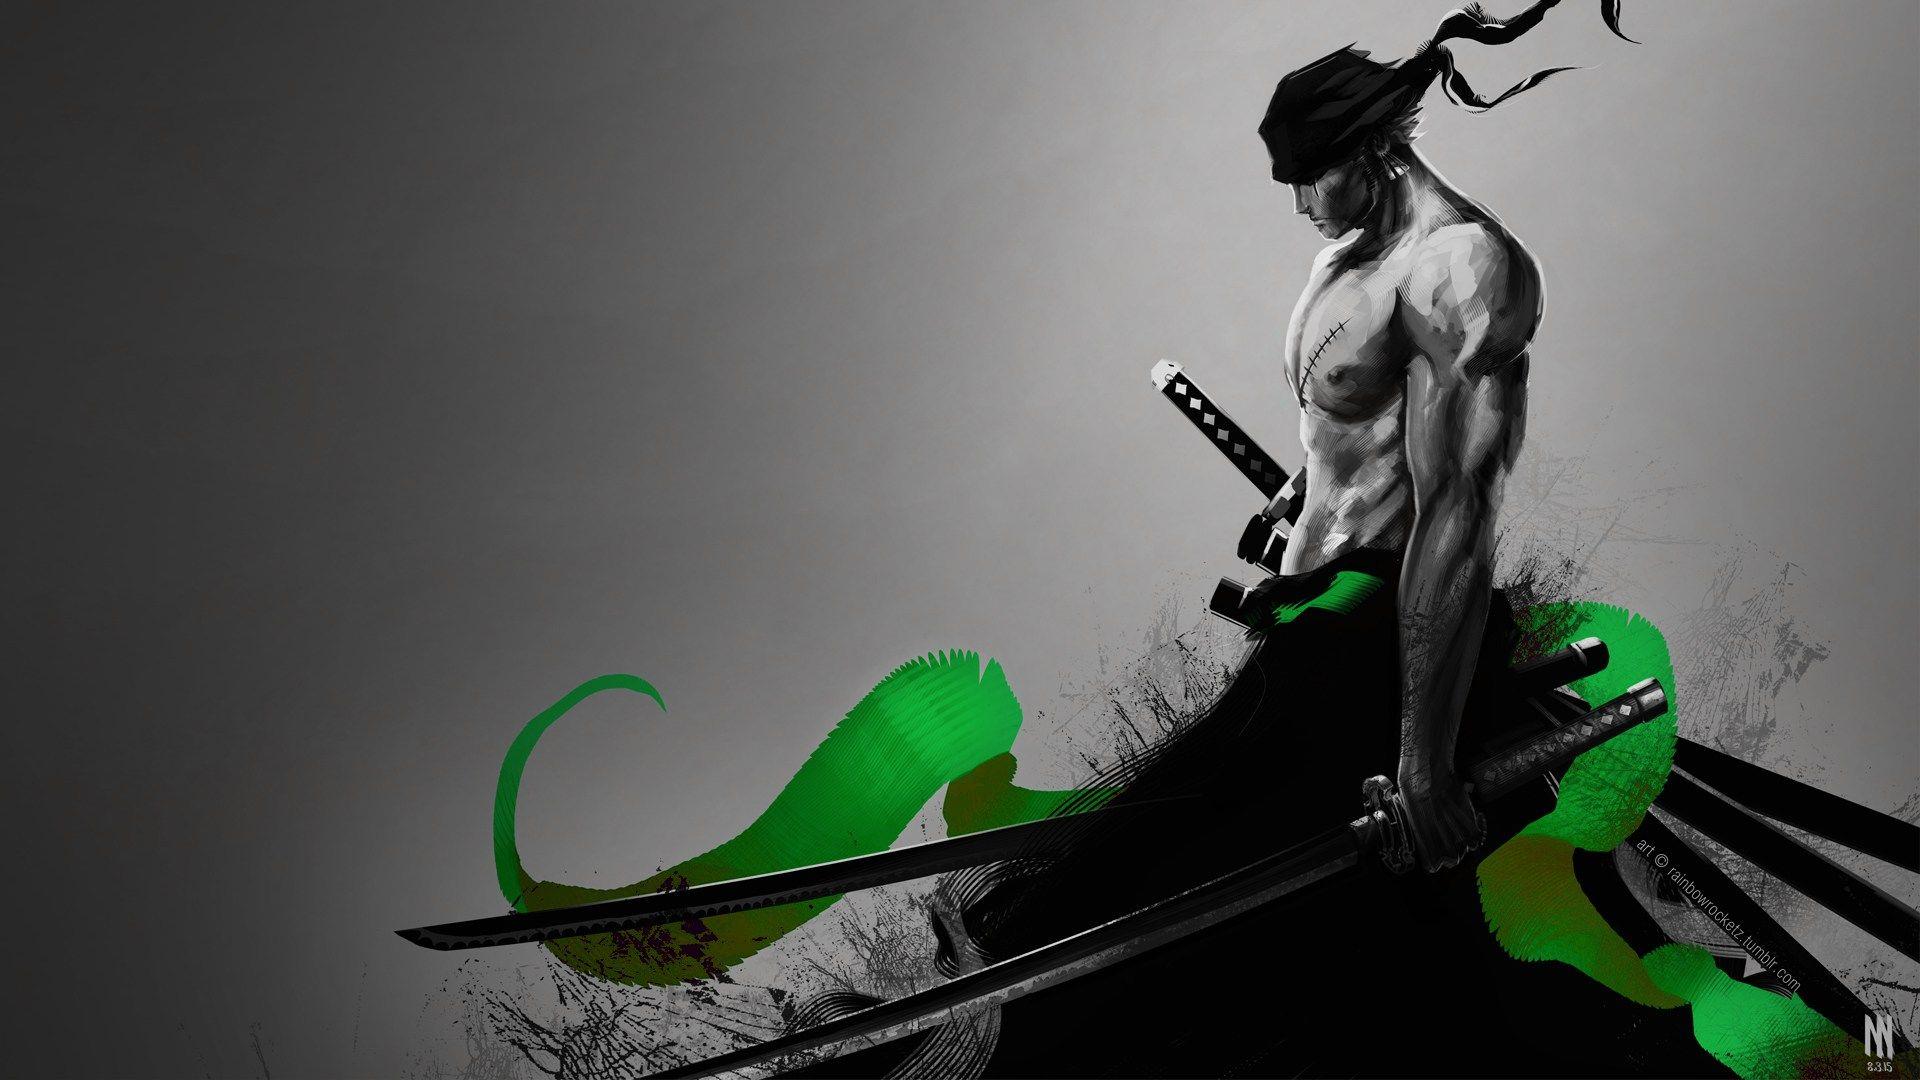 1920 x 1080 · jpeg - One Piece Zoro Wallpapers Iphone for Desktop Background 1920x1080 px ...